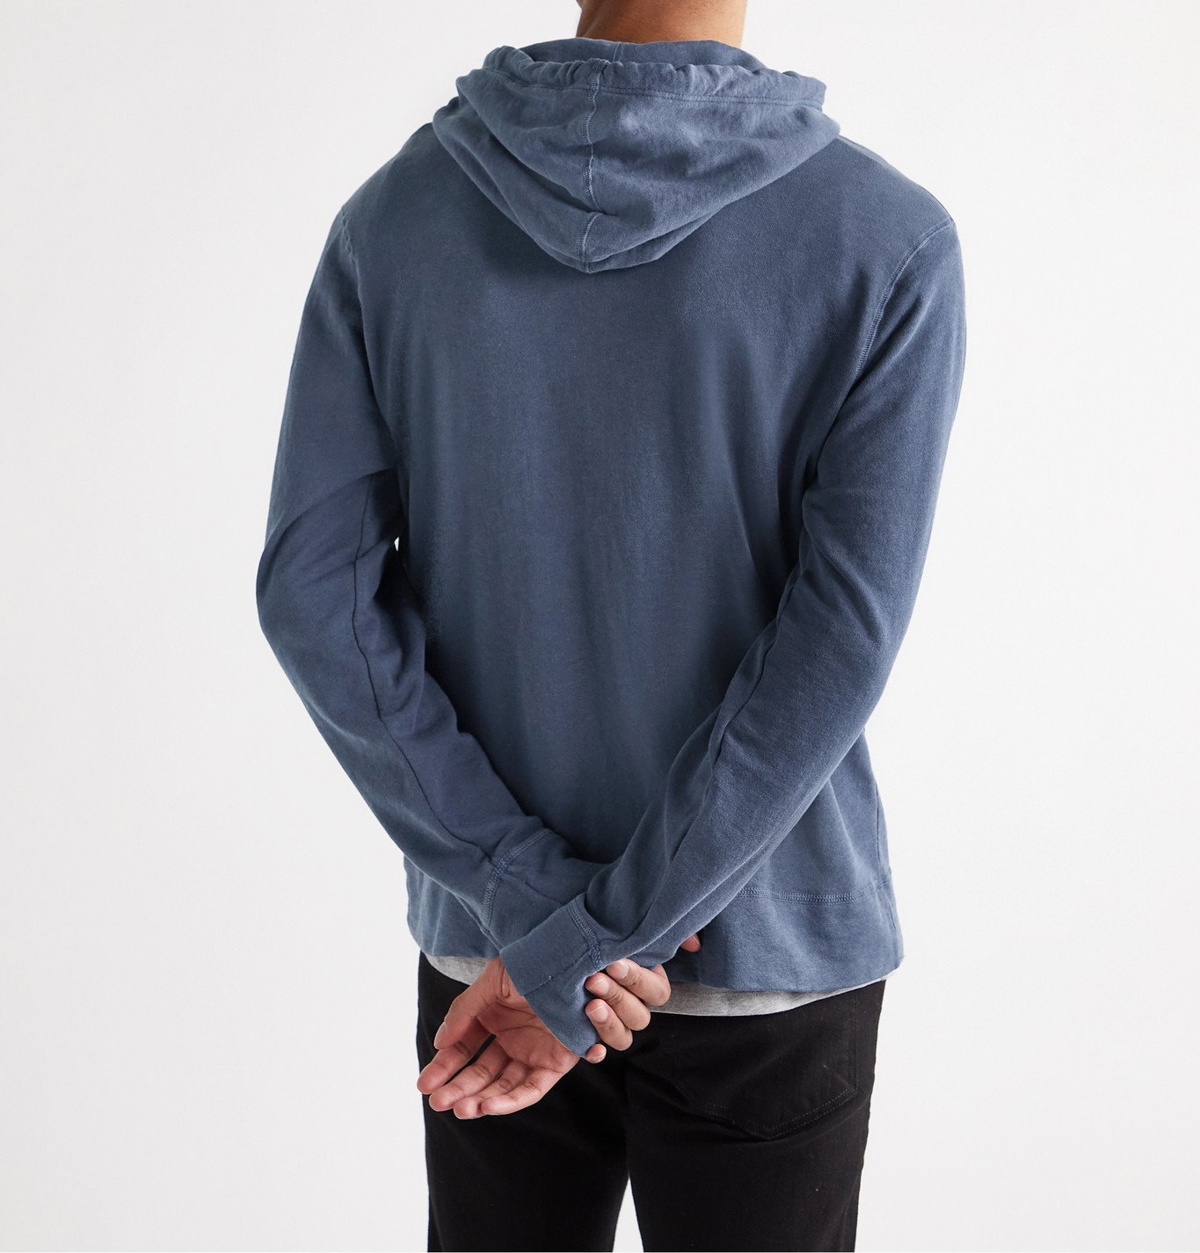 JAMES PERSE - Loopback Supima Cotton-Jersey Zip-Up Hoodie - Blue James Perse